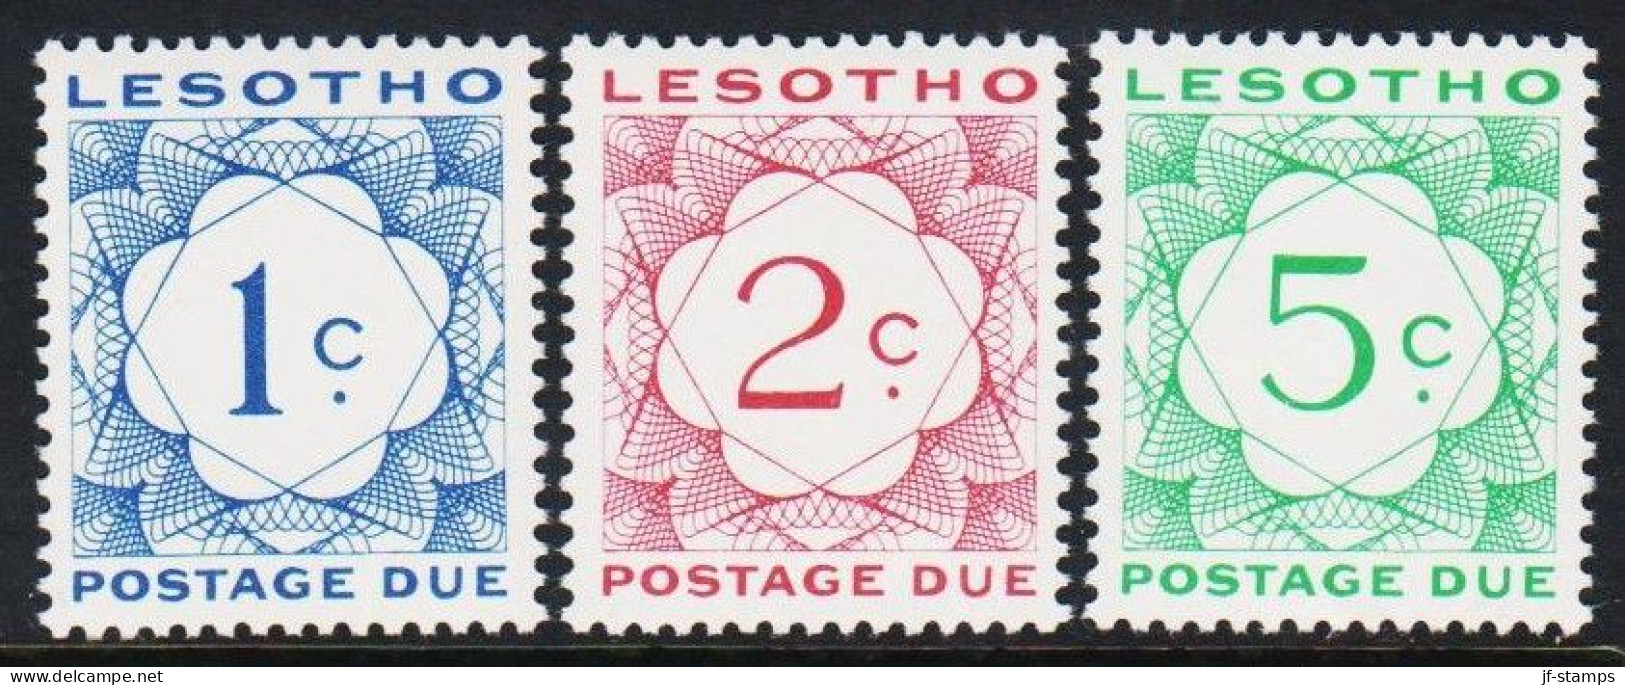 1967. LESOTHO. POSTAGE DUE, Complete Set With 3 Stamps. Never Hinged.  (Michel Porto 3-5) - JF544637 - Lesotho (1966-...)